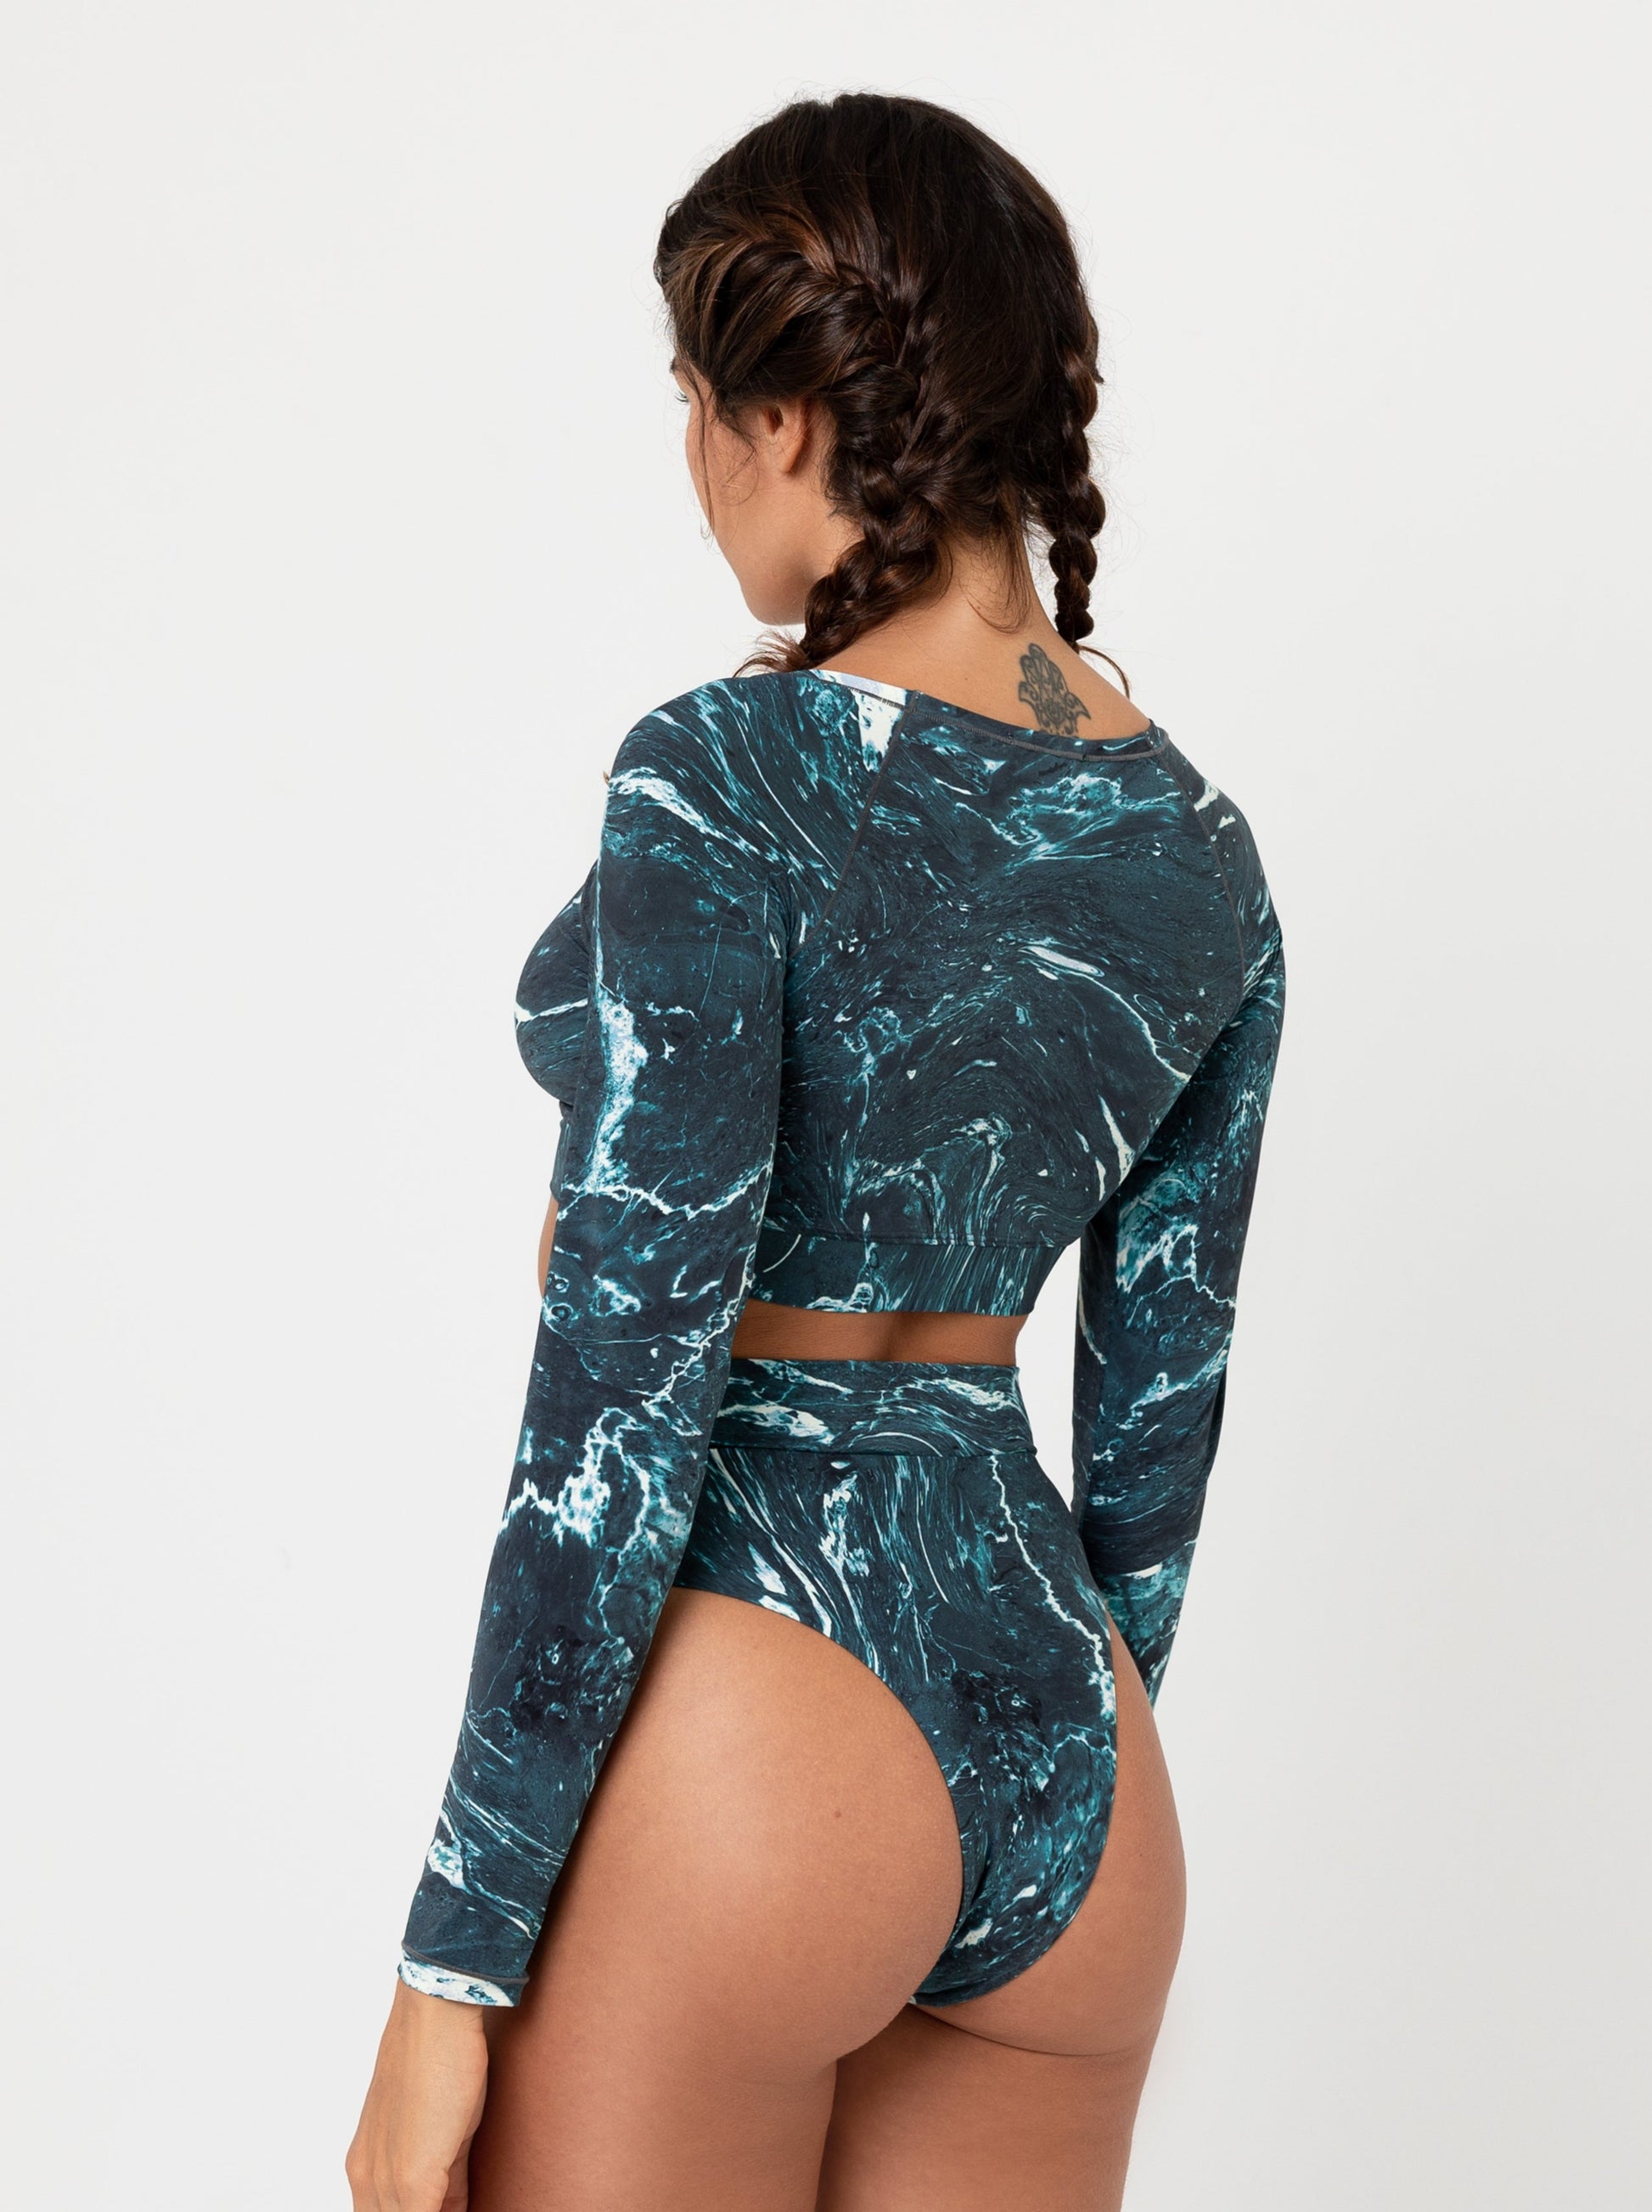 TREND RIPPLE Levh swimwear -Best Selling sustainable Long Sleeve Crop Top with UV protection